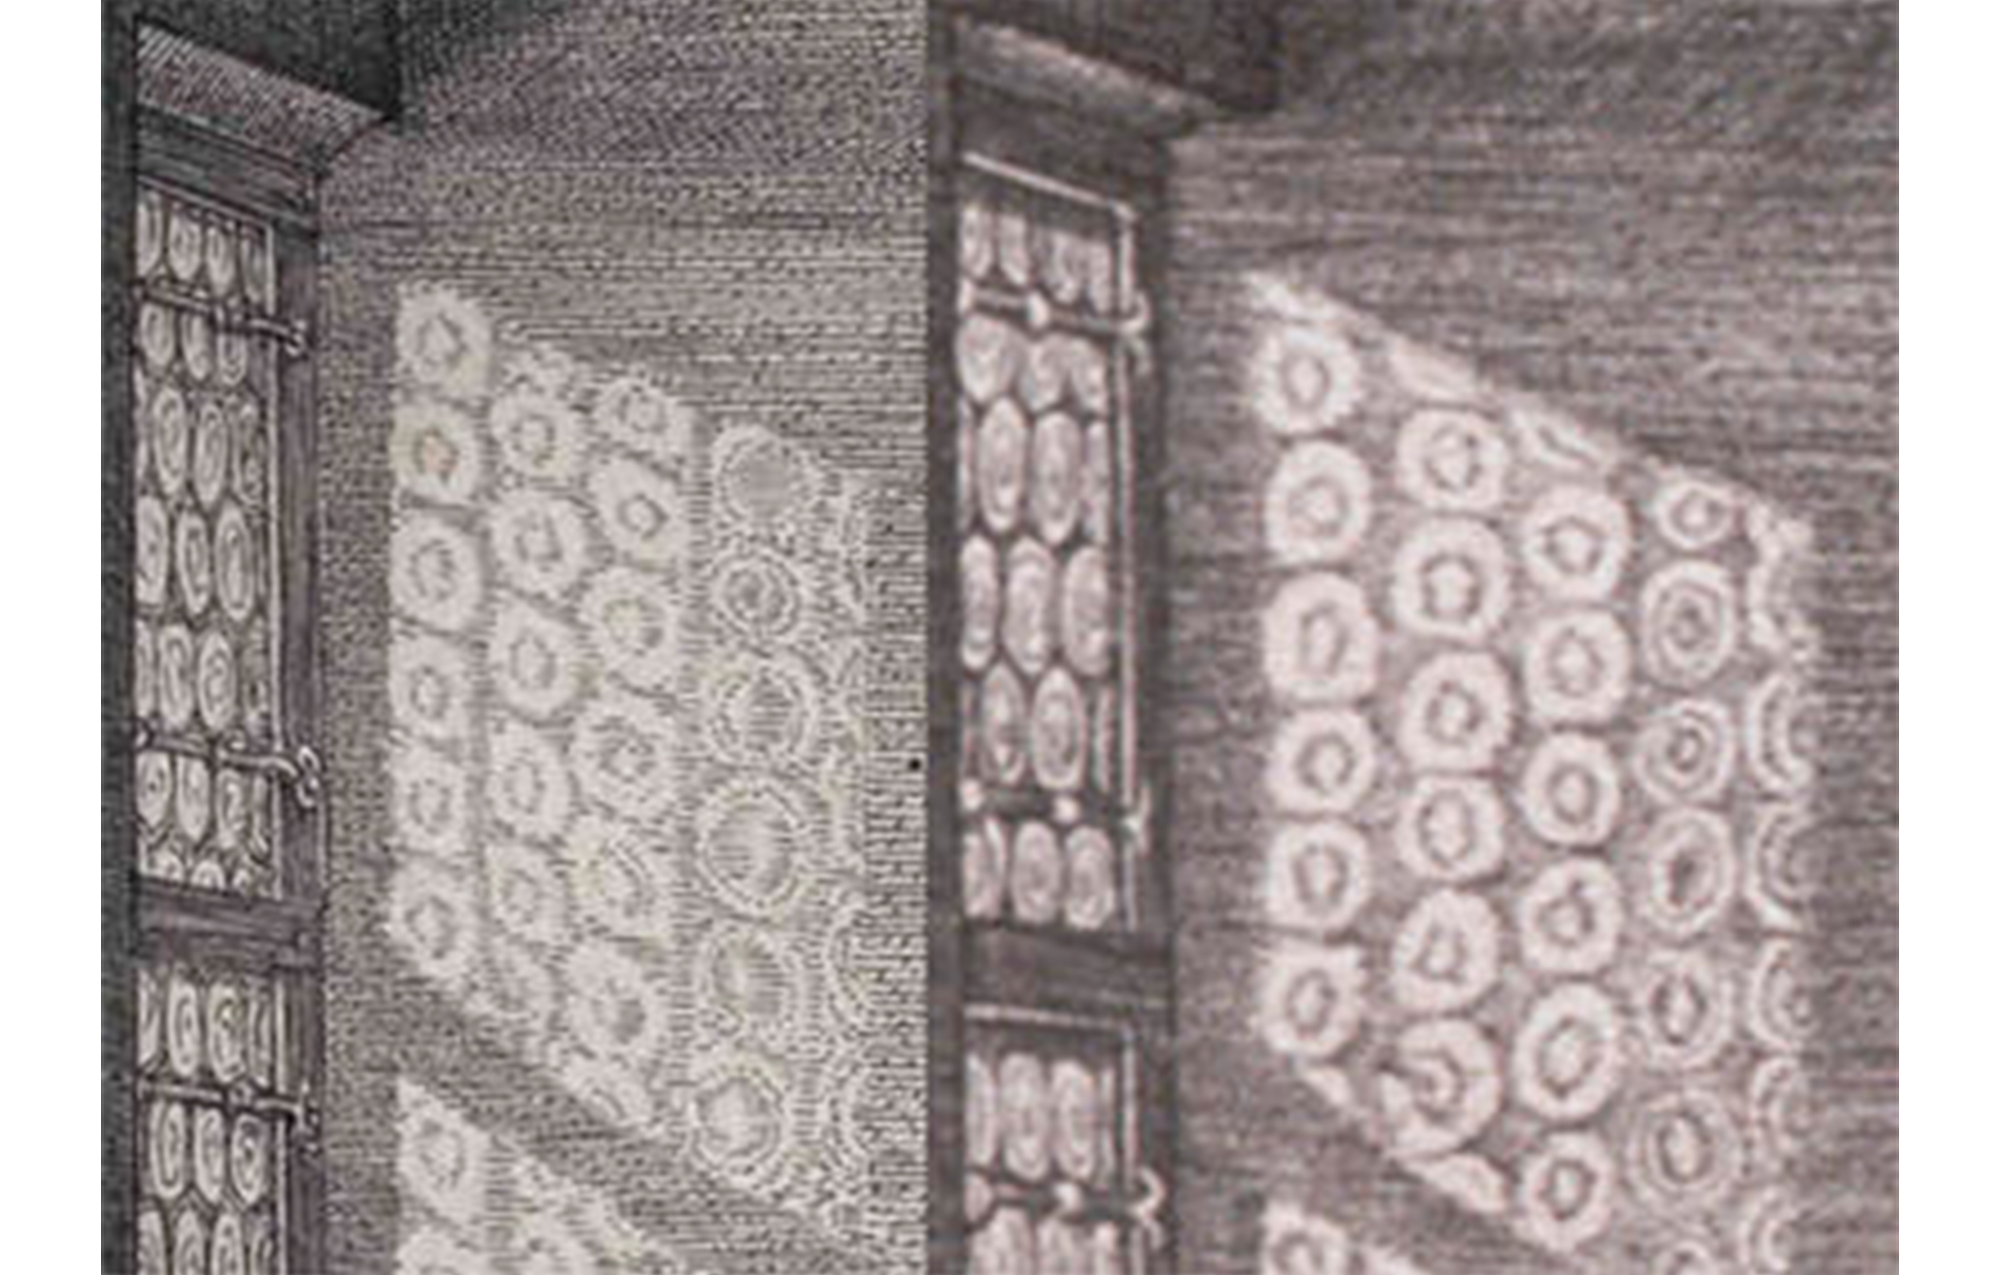 two prints, side by side. both of them depict a glass window on the left, casting a patterned shadow on the wall